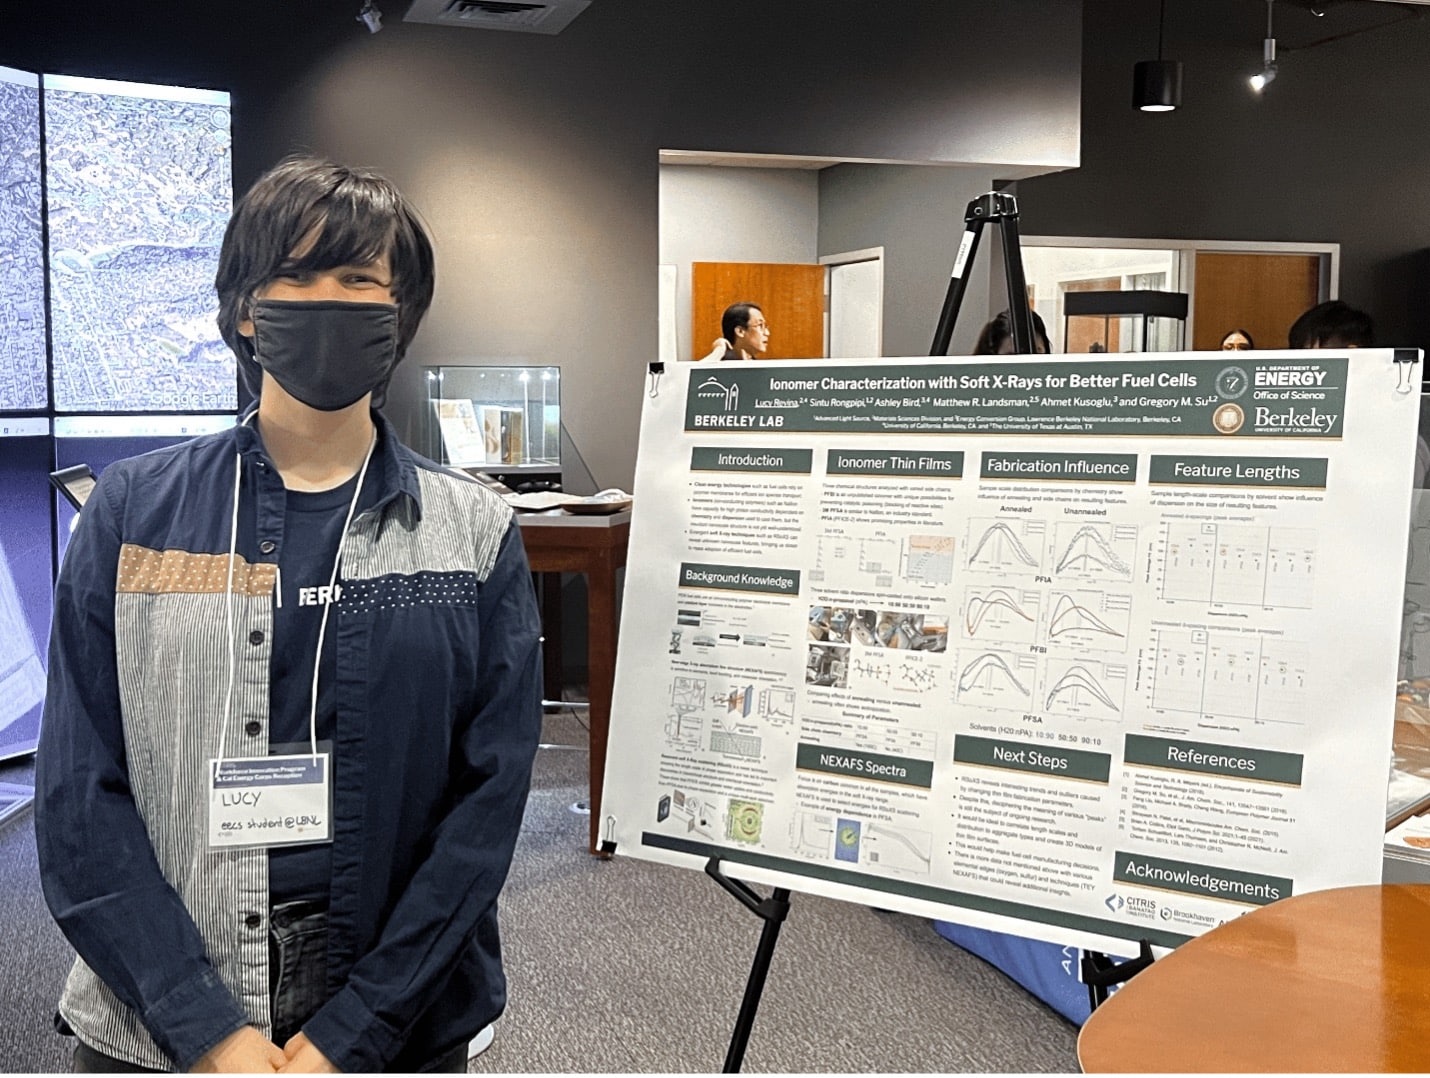 A student with short black hair and a black face mask poses next to a research poster at a poster session inside the CITRIS Tech Museum at UC Berkeley.